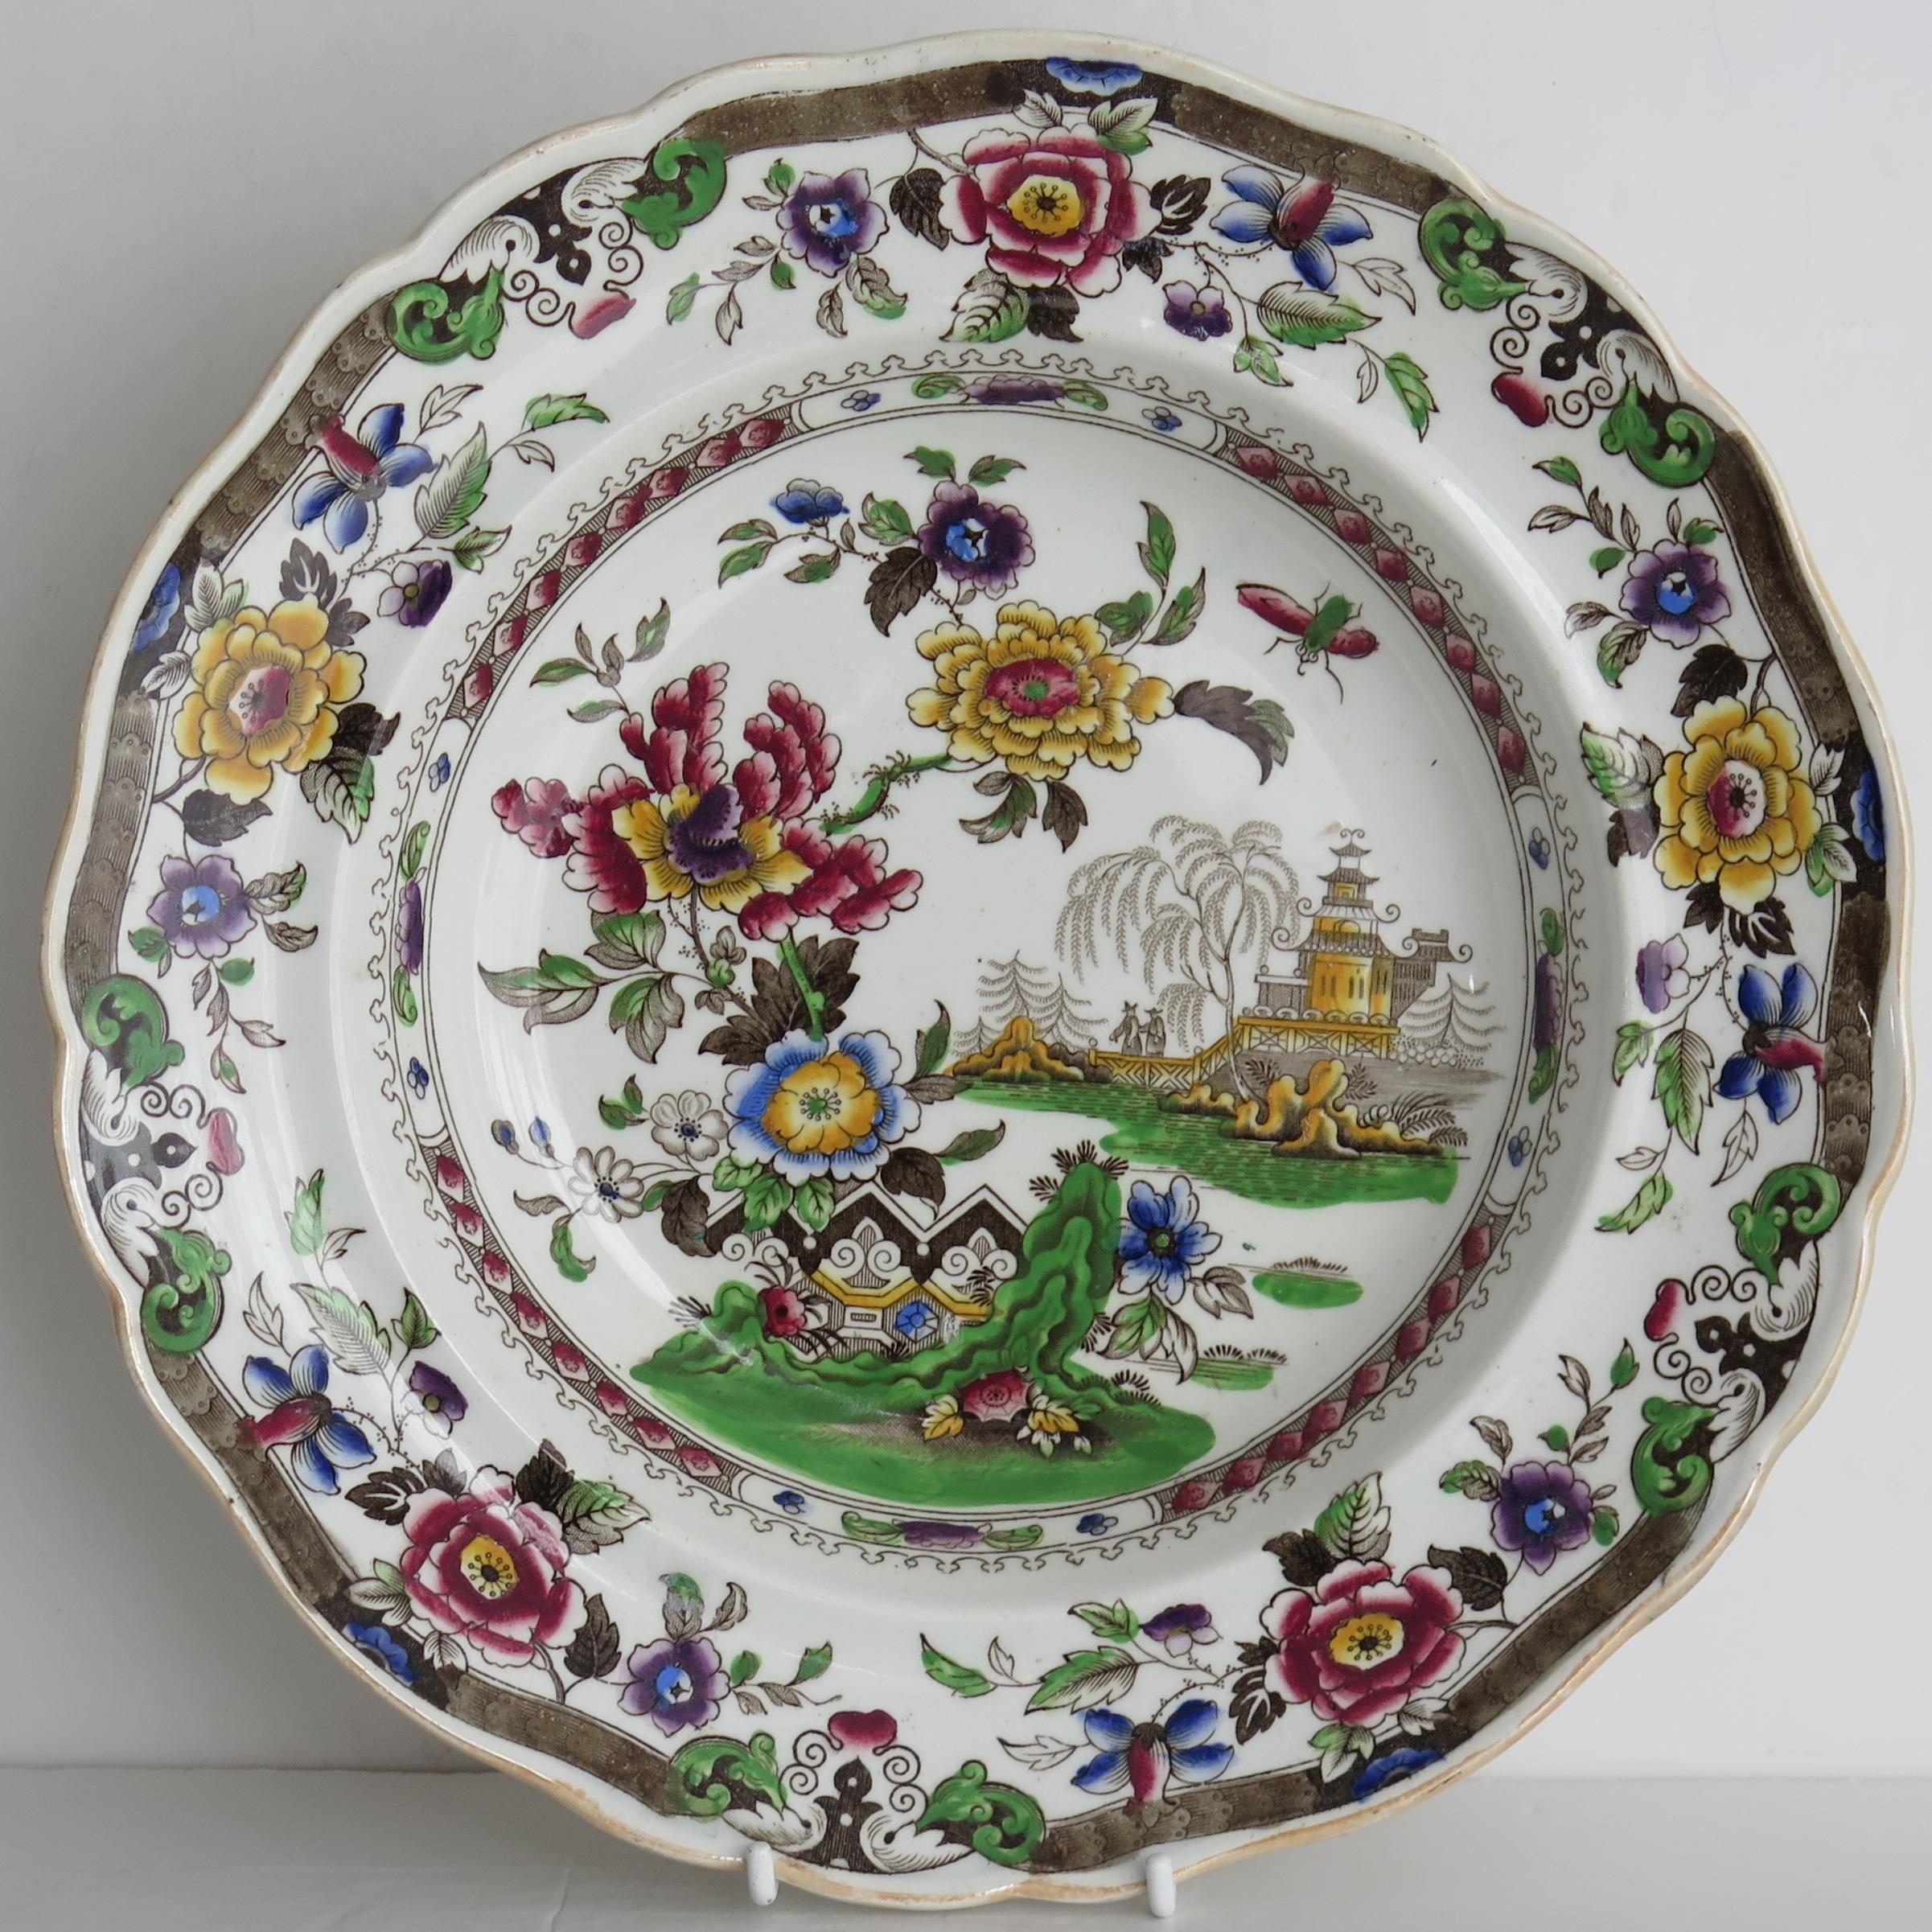 This is a very good early decorative large earthenware pottery Soup Bowl or Deep Plate made by Zachariah Boyle of Hanley and Stoke, England, circa 1825.

The bowl/plate is well potted with a curvy indented rim.

The plate has a detailed